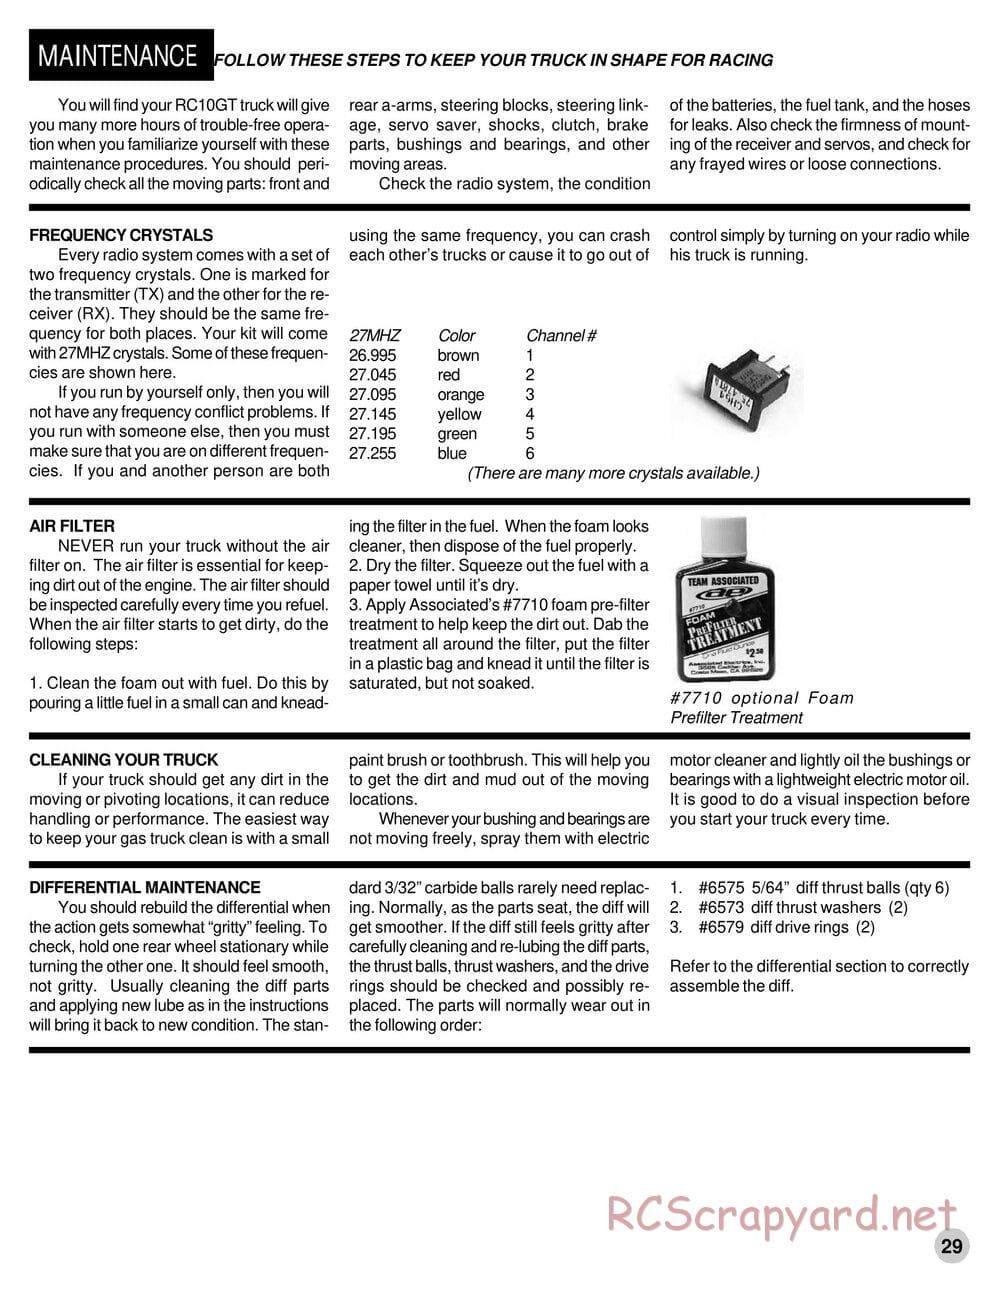 Team Associated - RC10GT RTR Plus - Manual - Page 29